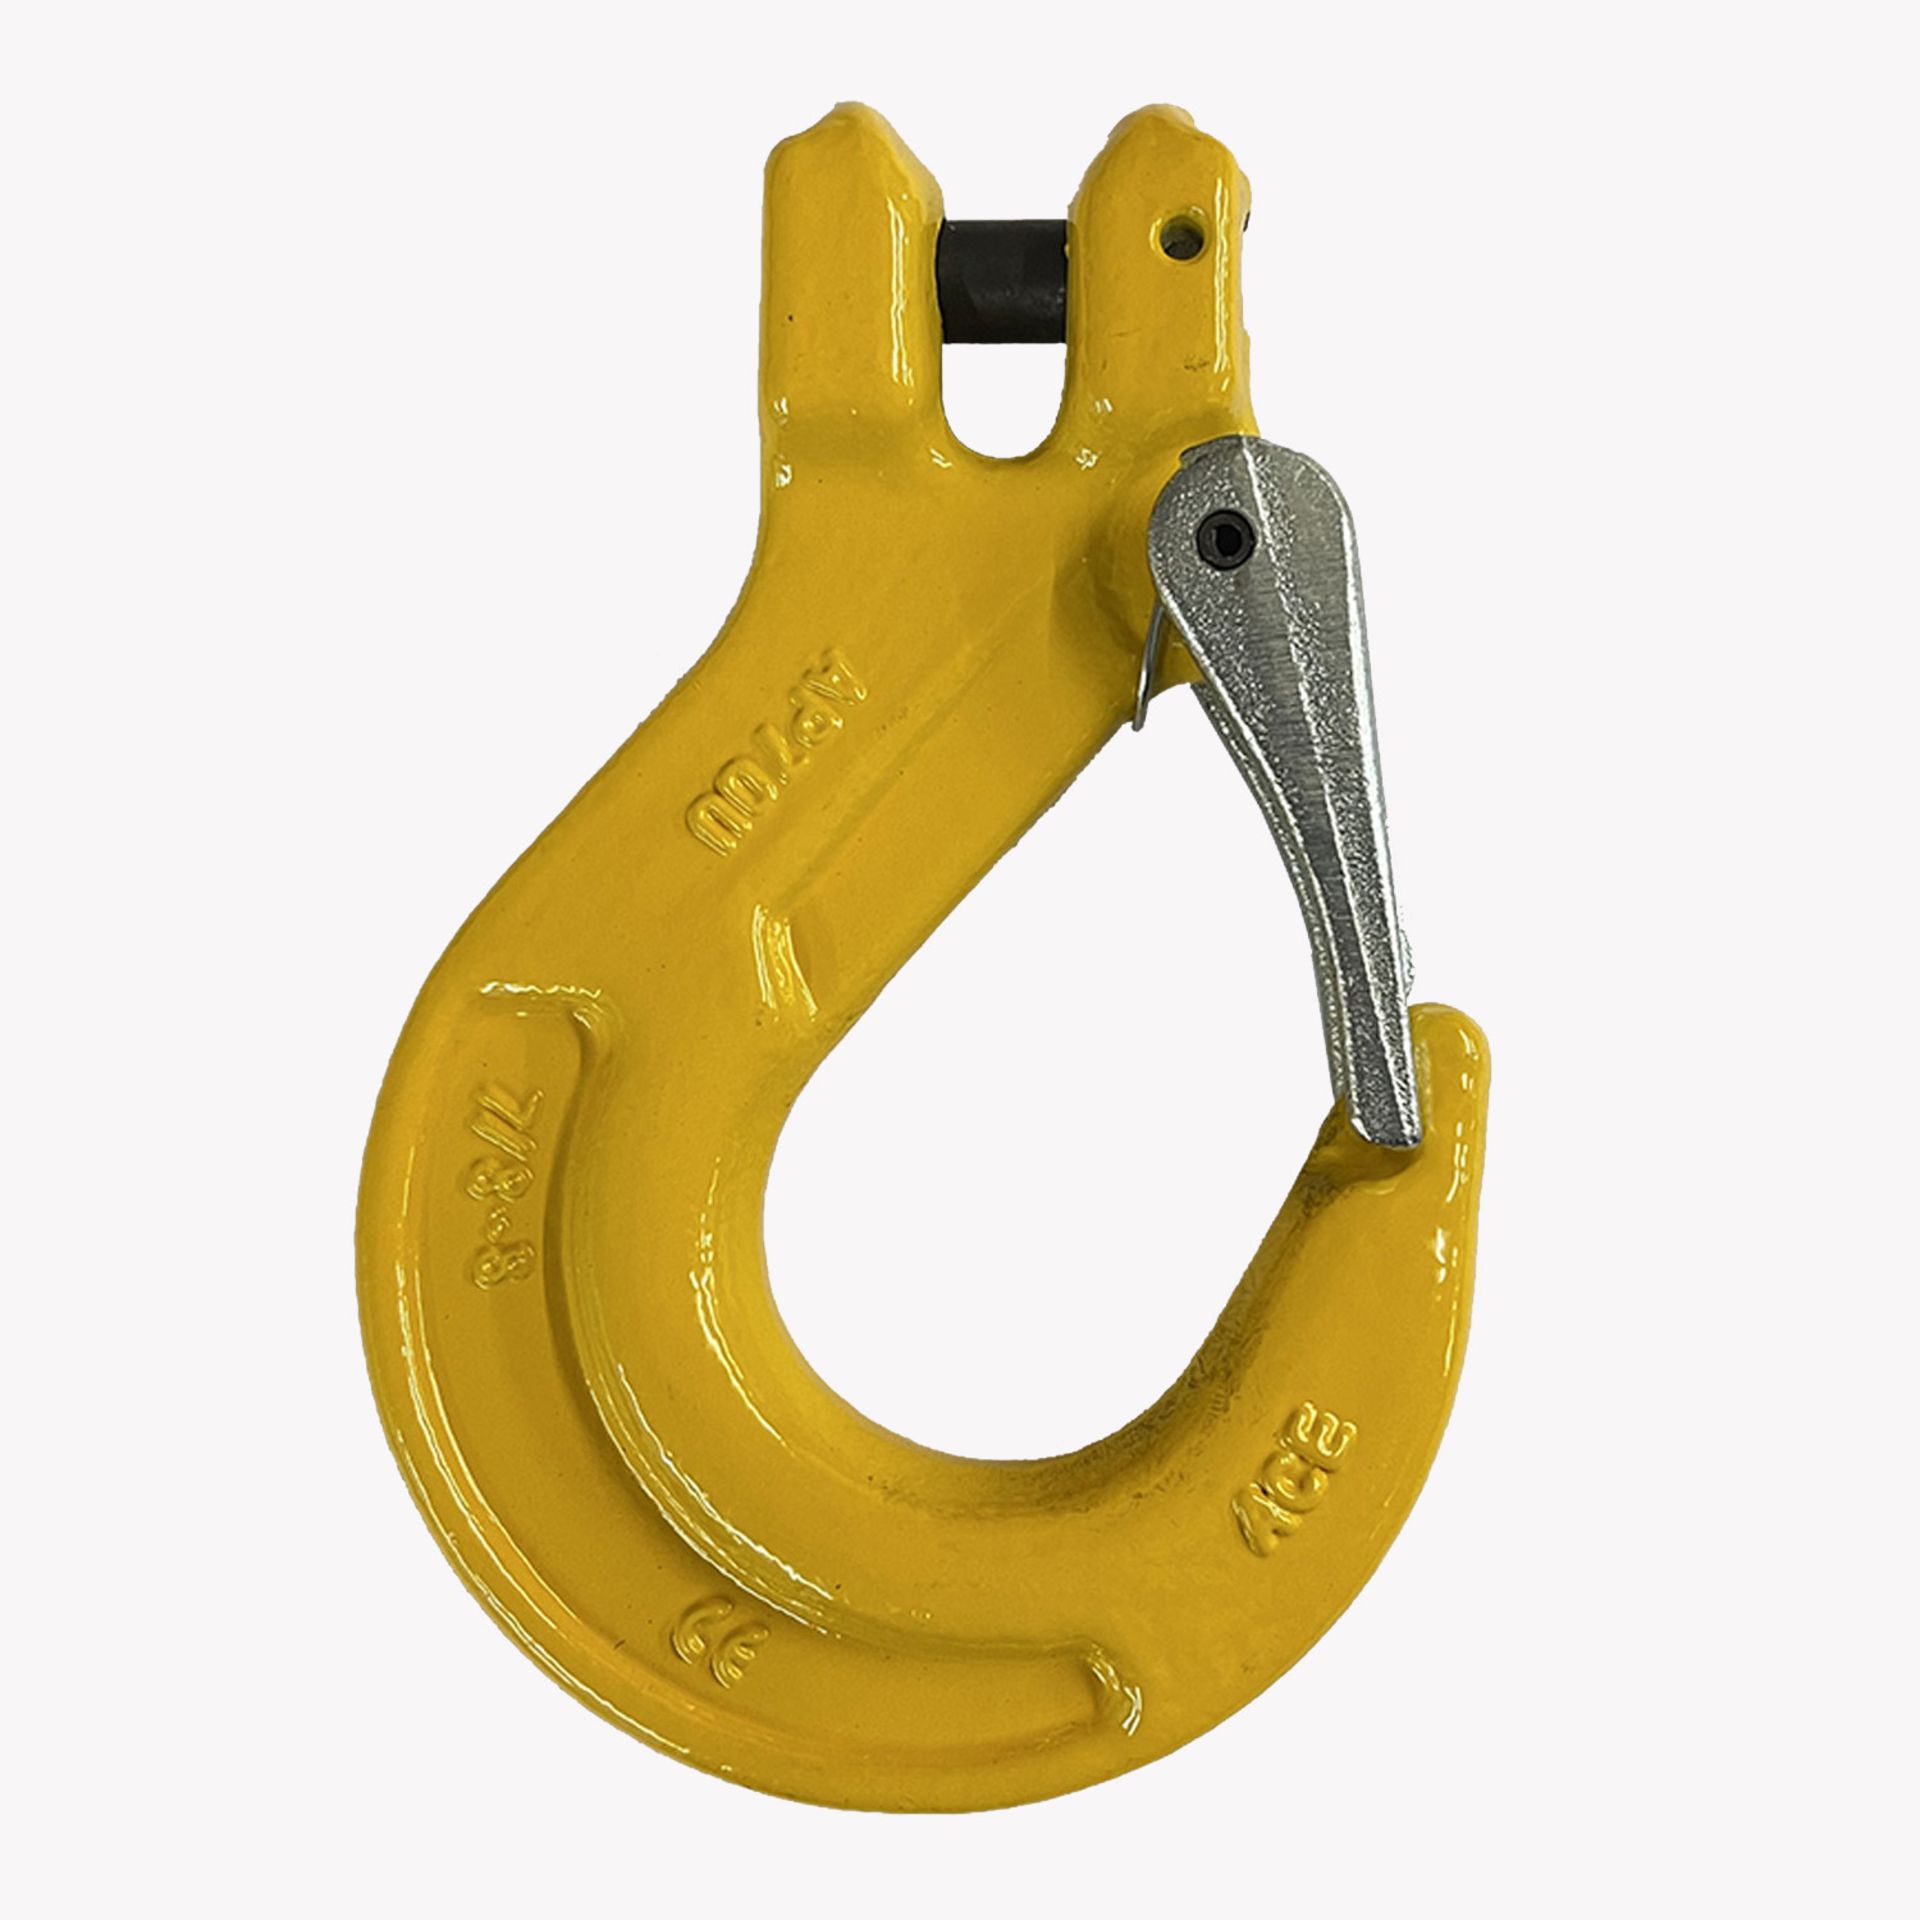 8 X 10mm Grade 8 Clevis Sling Hook With Safety Catch (Yascsh10)